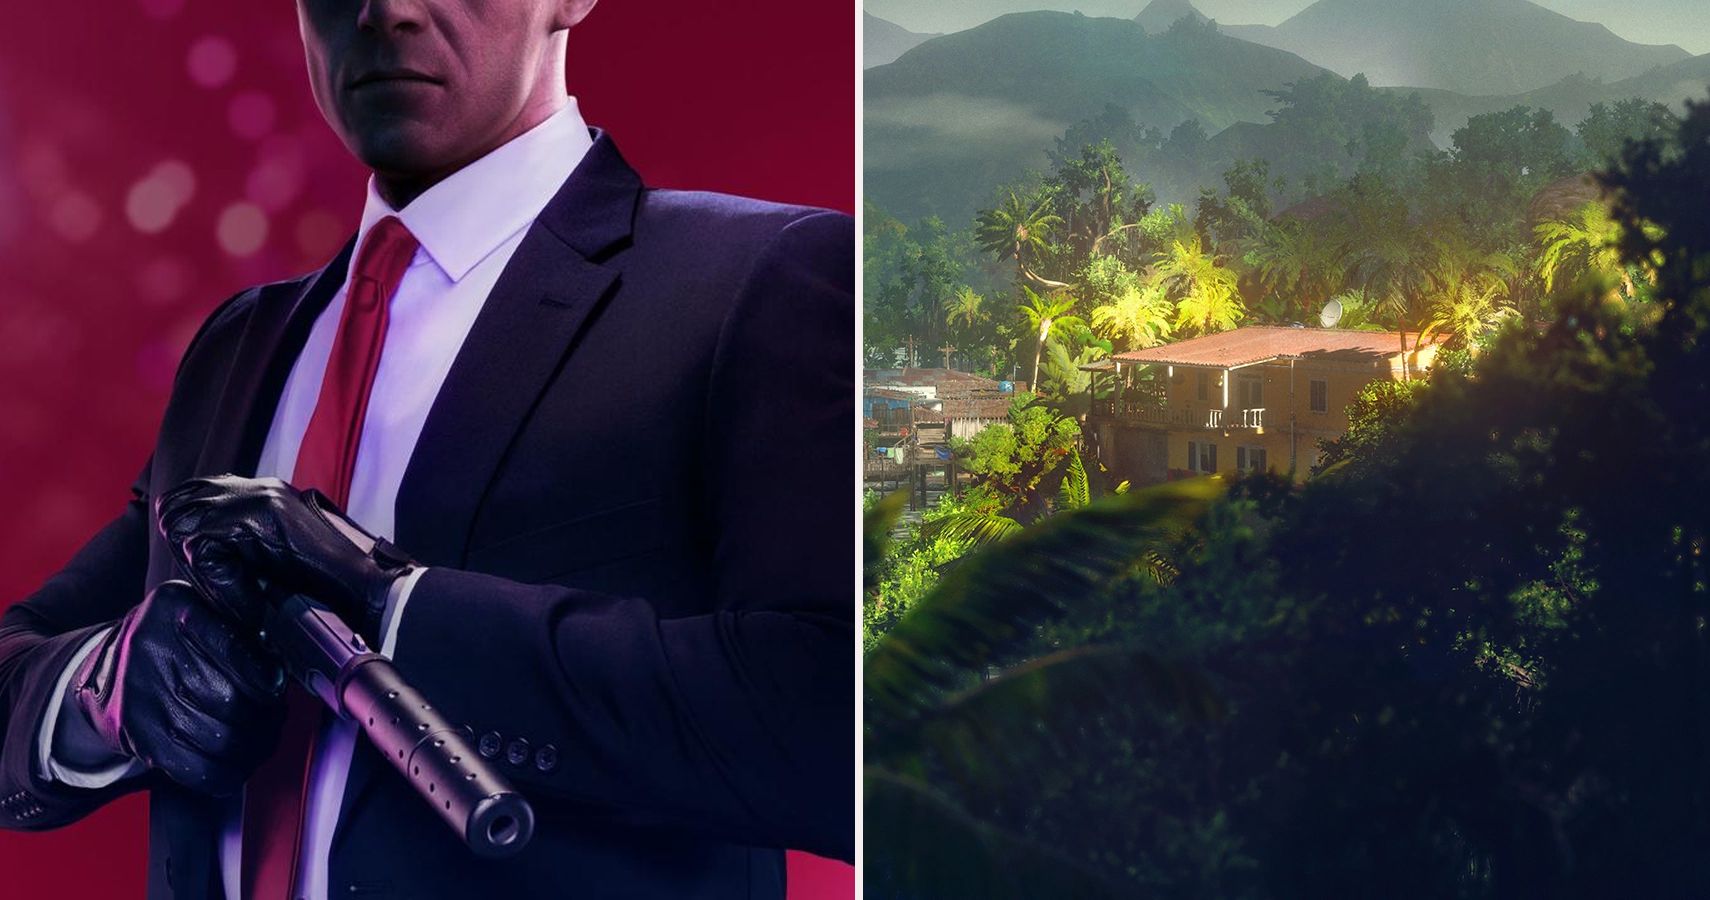 Hitman 2 10 Things To Do In Santa Fortuna That The Game Doesn’t Tell You About